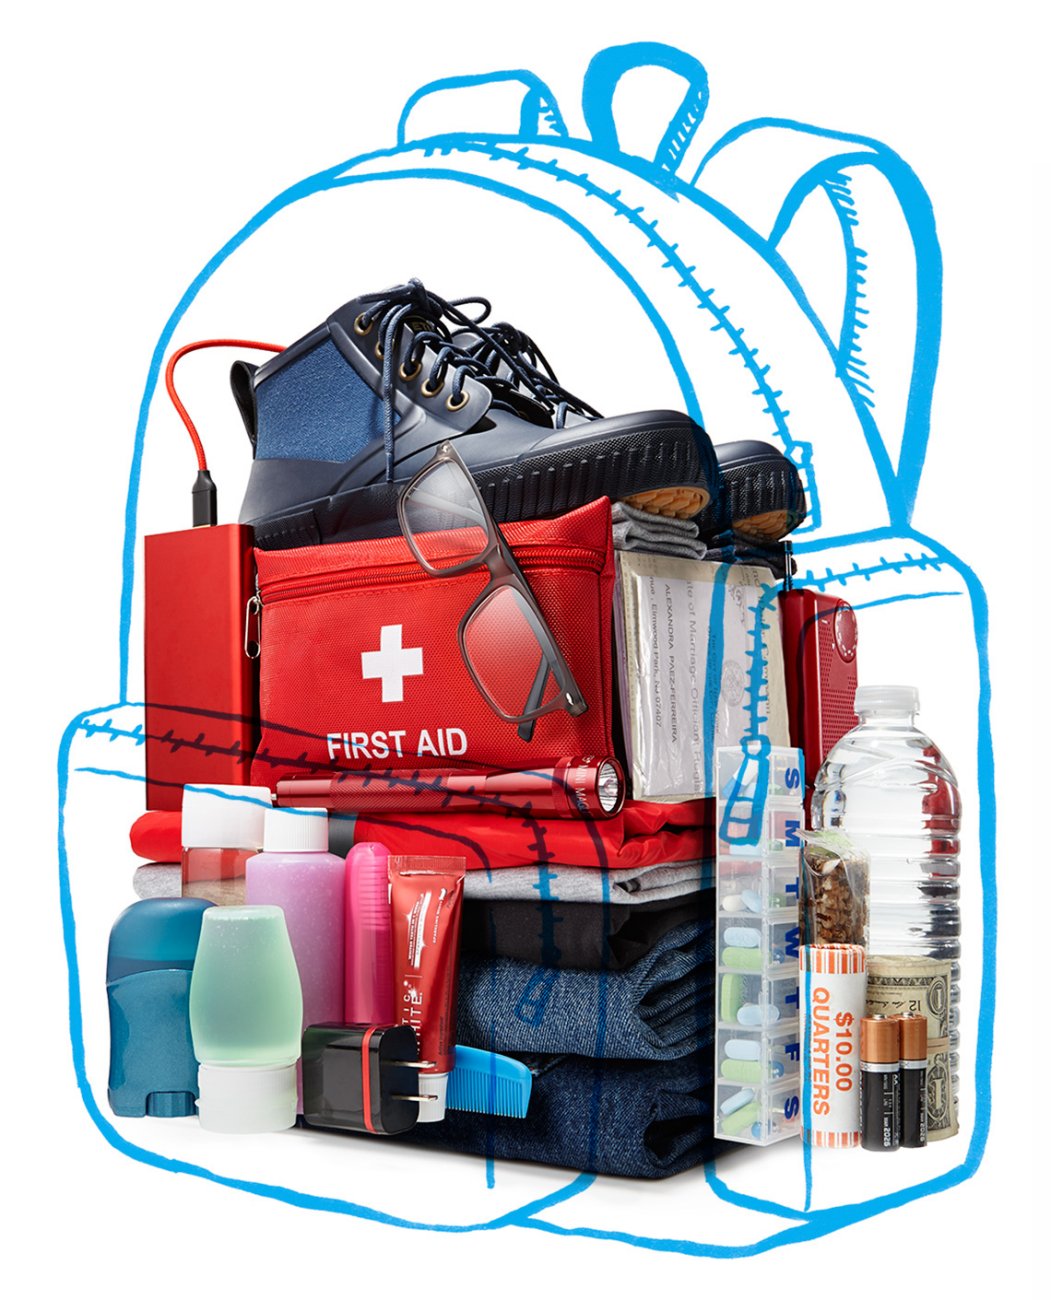 What to Pack in an Emergency Kit for Any Disaster